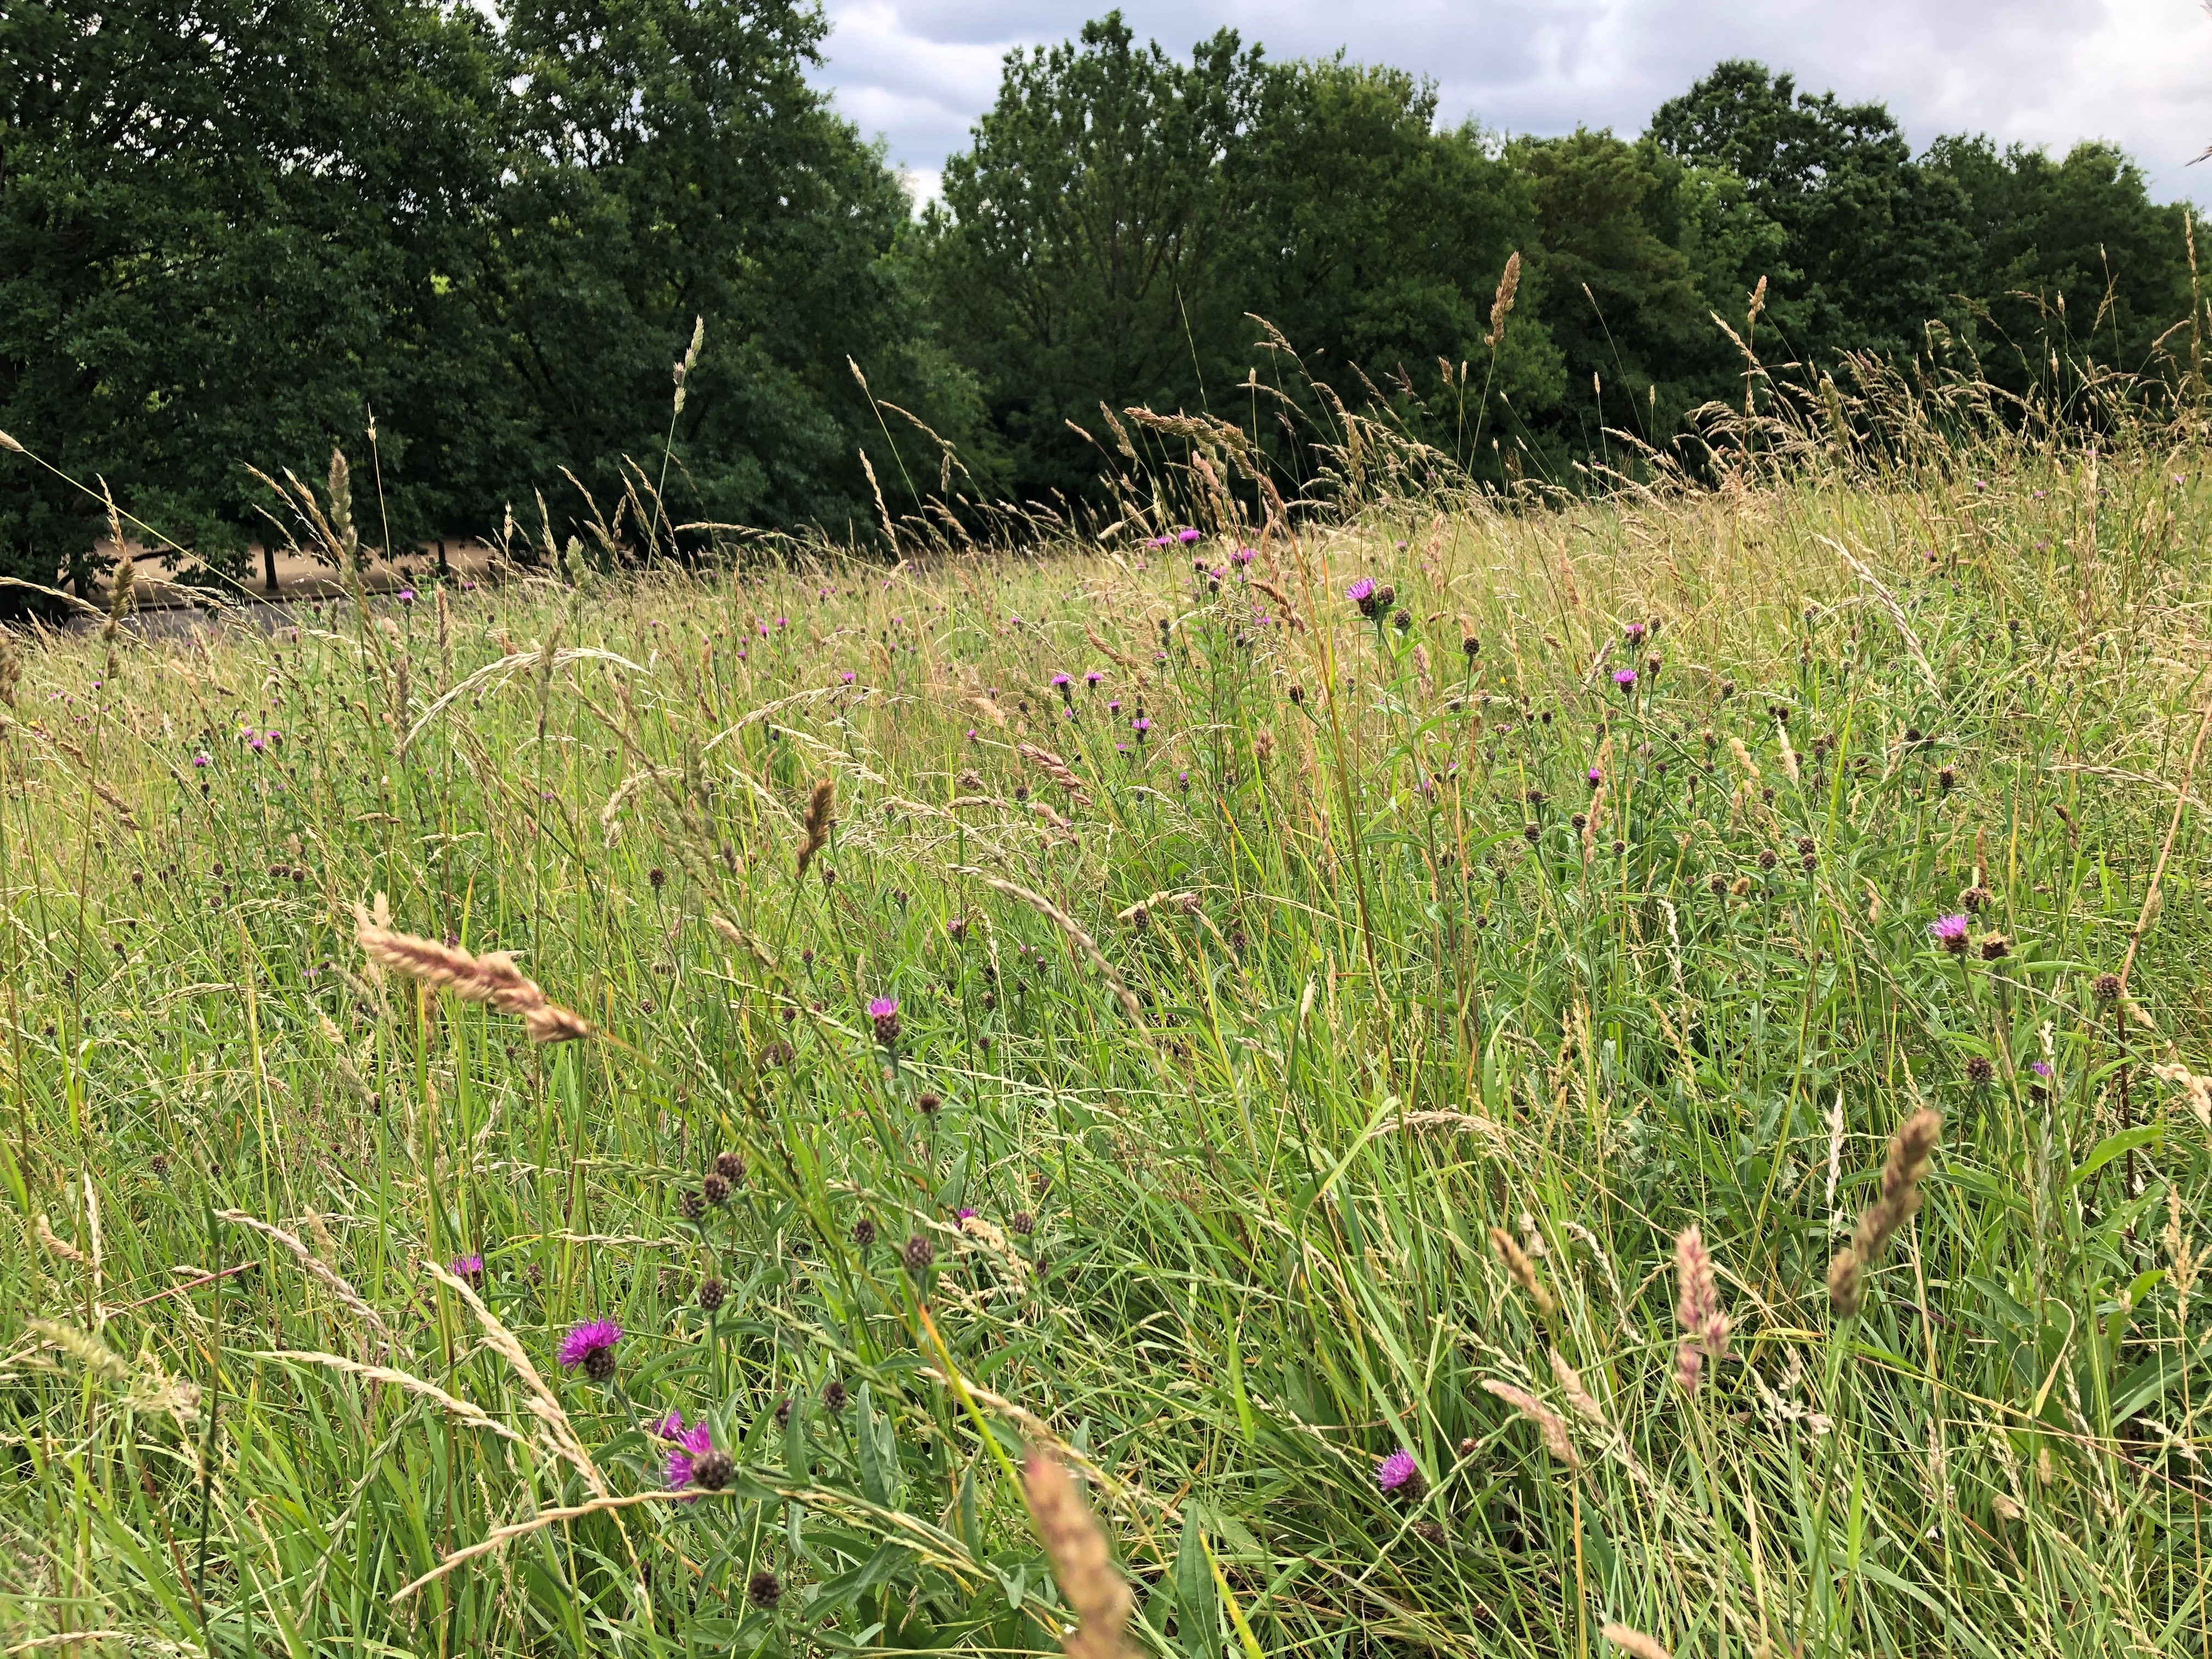 Wild areas in urban parks can create habitat for insects such as grasshoppers and butterflies